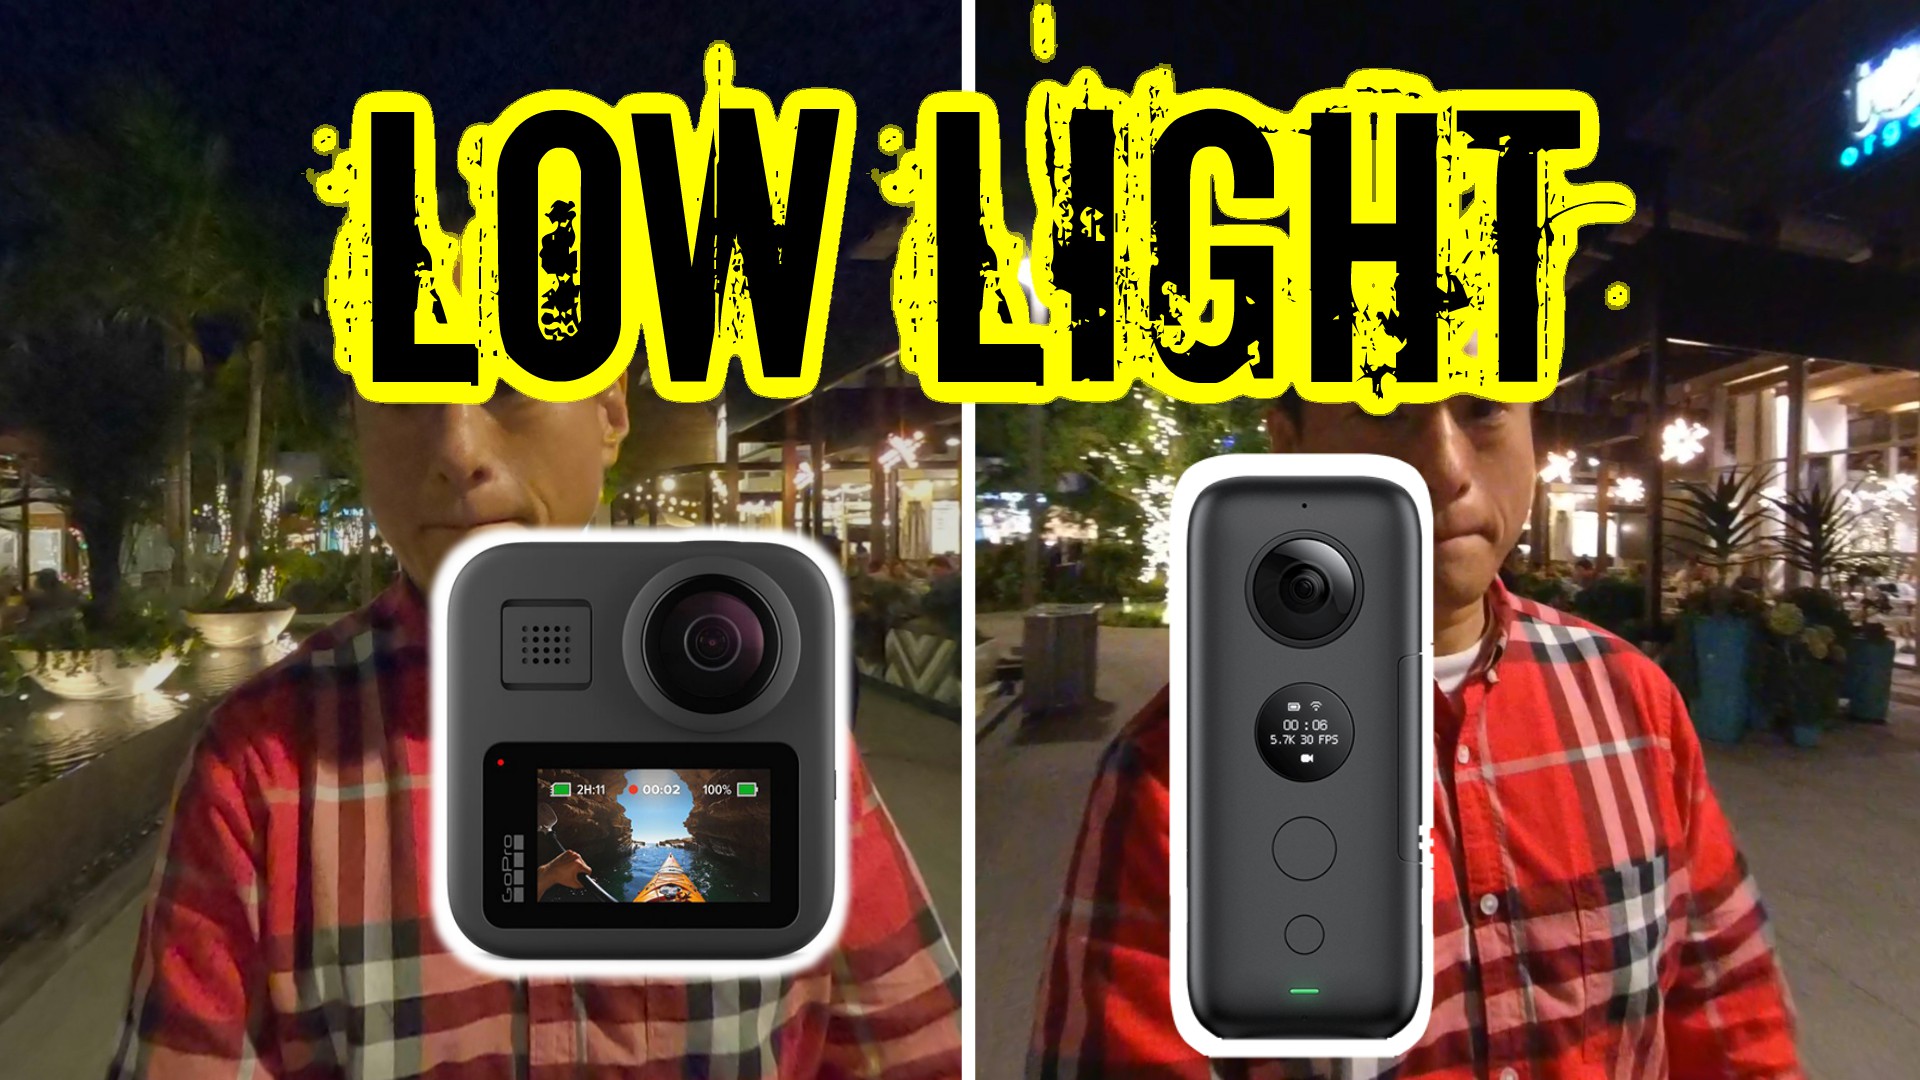 GoPro MAX vs Insta360 One X low light and stabilization comparison posted! - 360